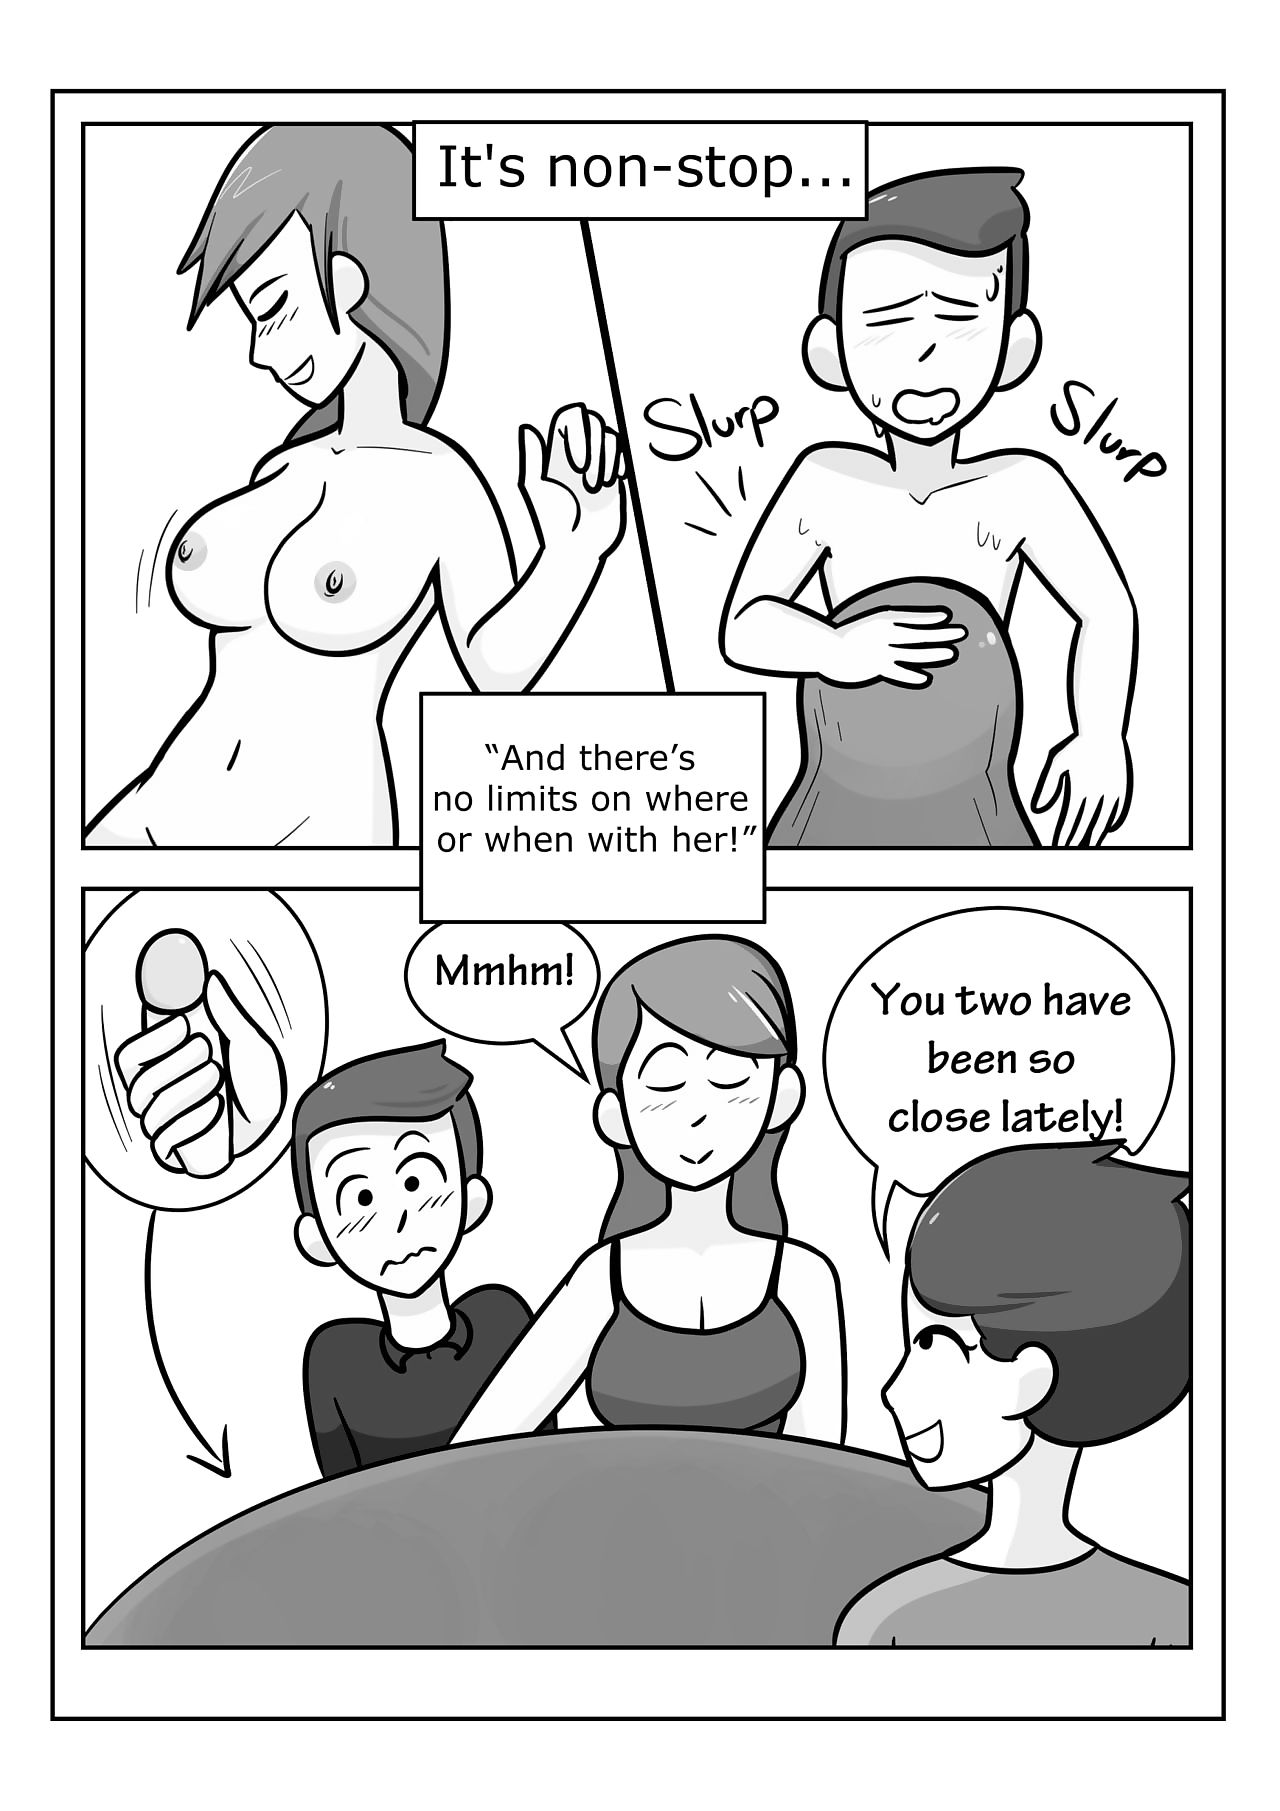 Why Does My Sis Wanna Bang So Much? page 1